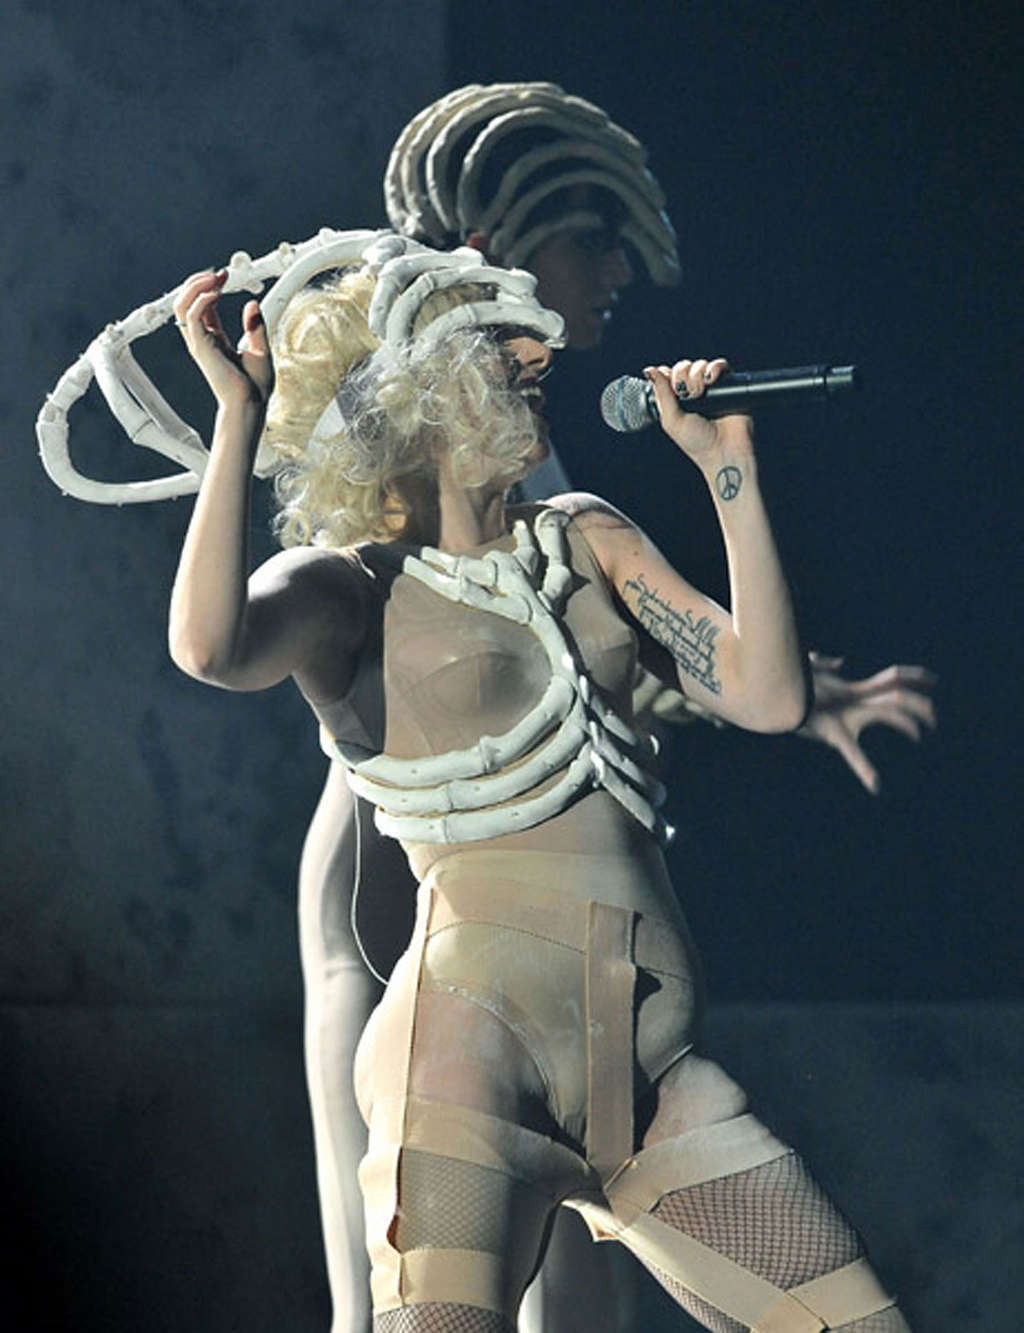 Lady Gaga performing in some strange outfit on concert and upskirt pictures #75373047